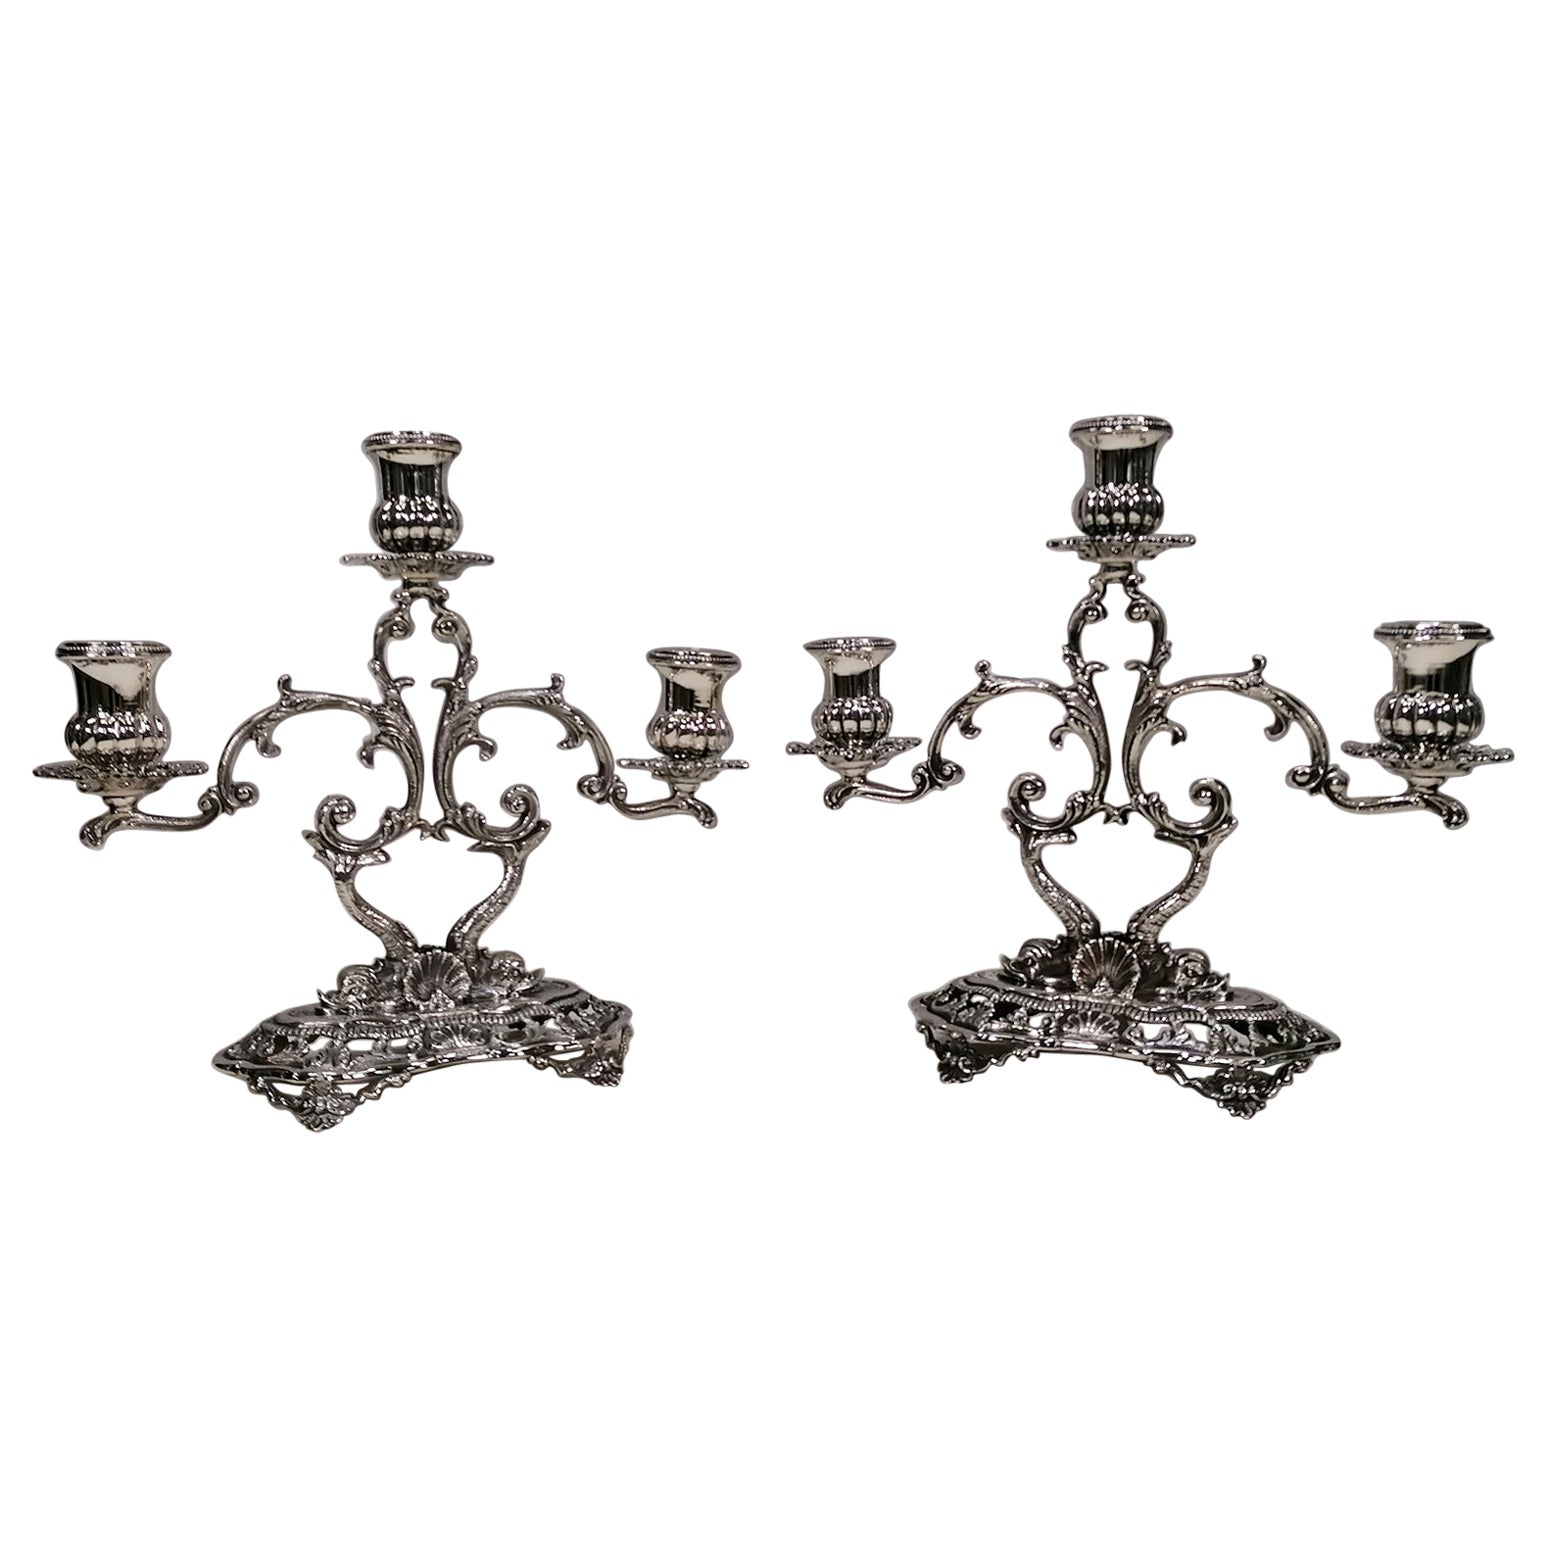 Pair of 3-lights candelabra in Baroque style.
The candlesticks were made with the technique of casting, engraving and chisel completely made by hand.
The oblong-shaped base rests on 4 feet and is shaped and perforated with volute and shell designs,